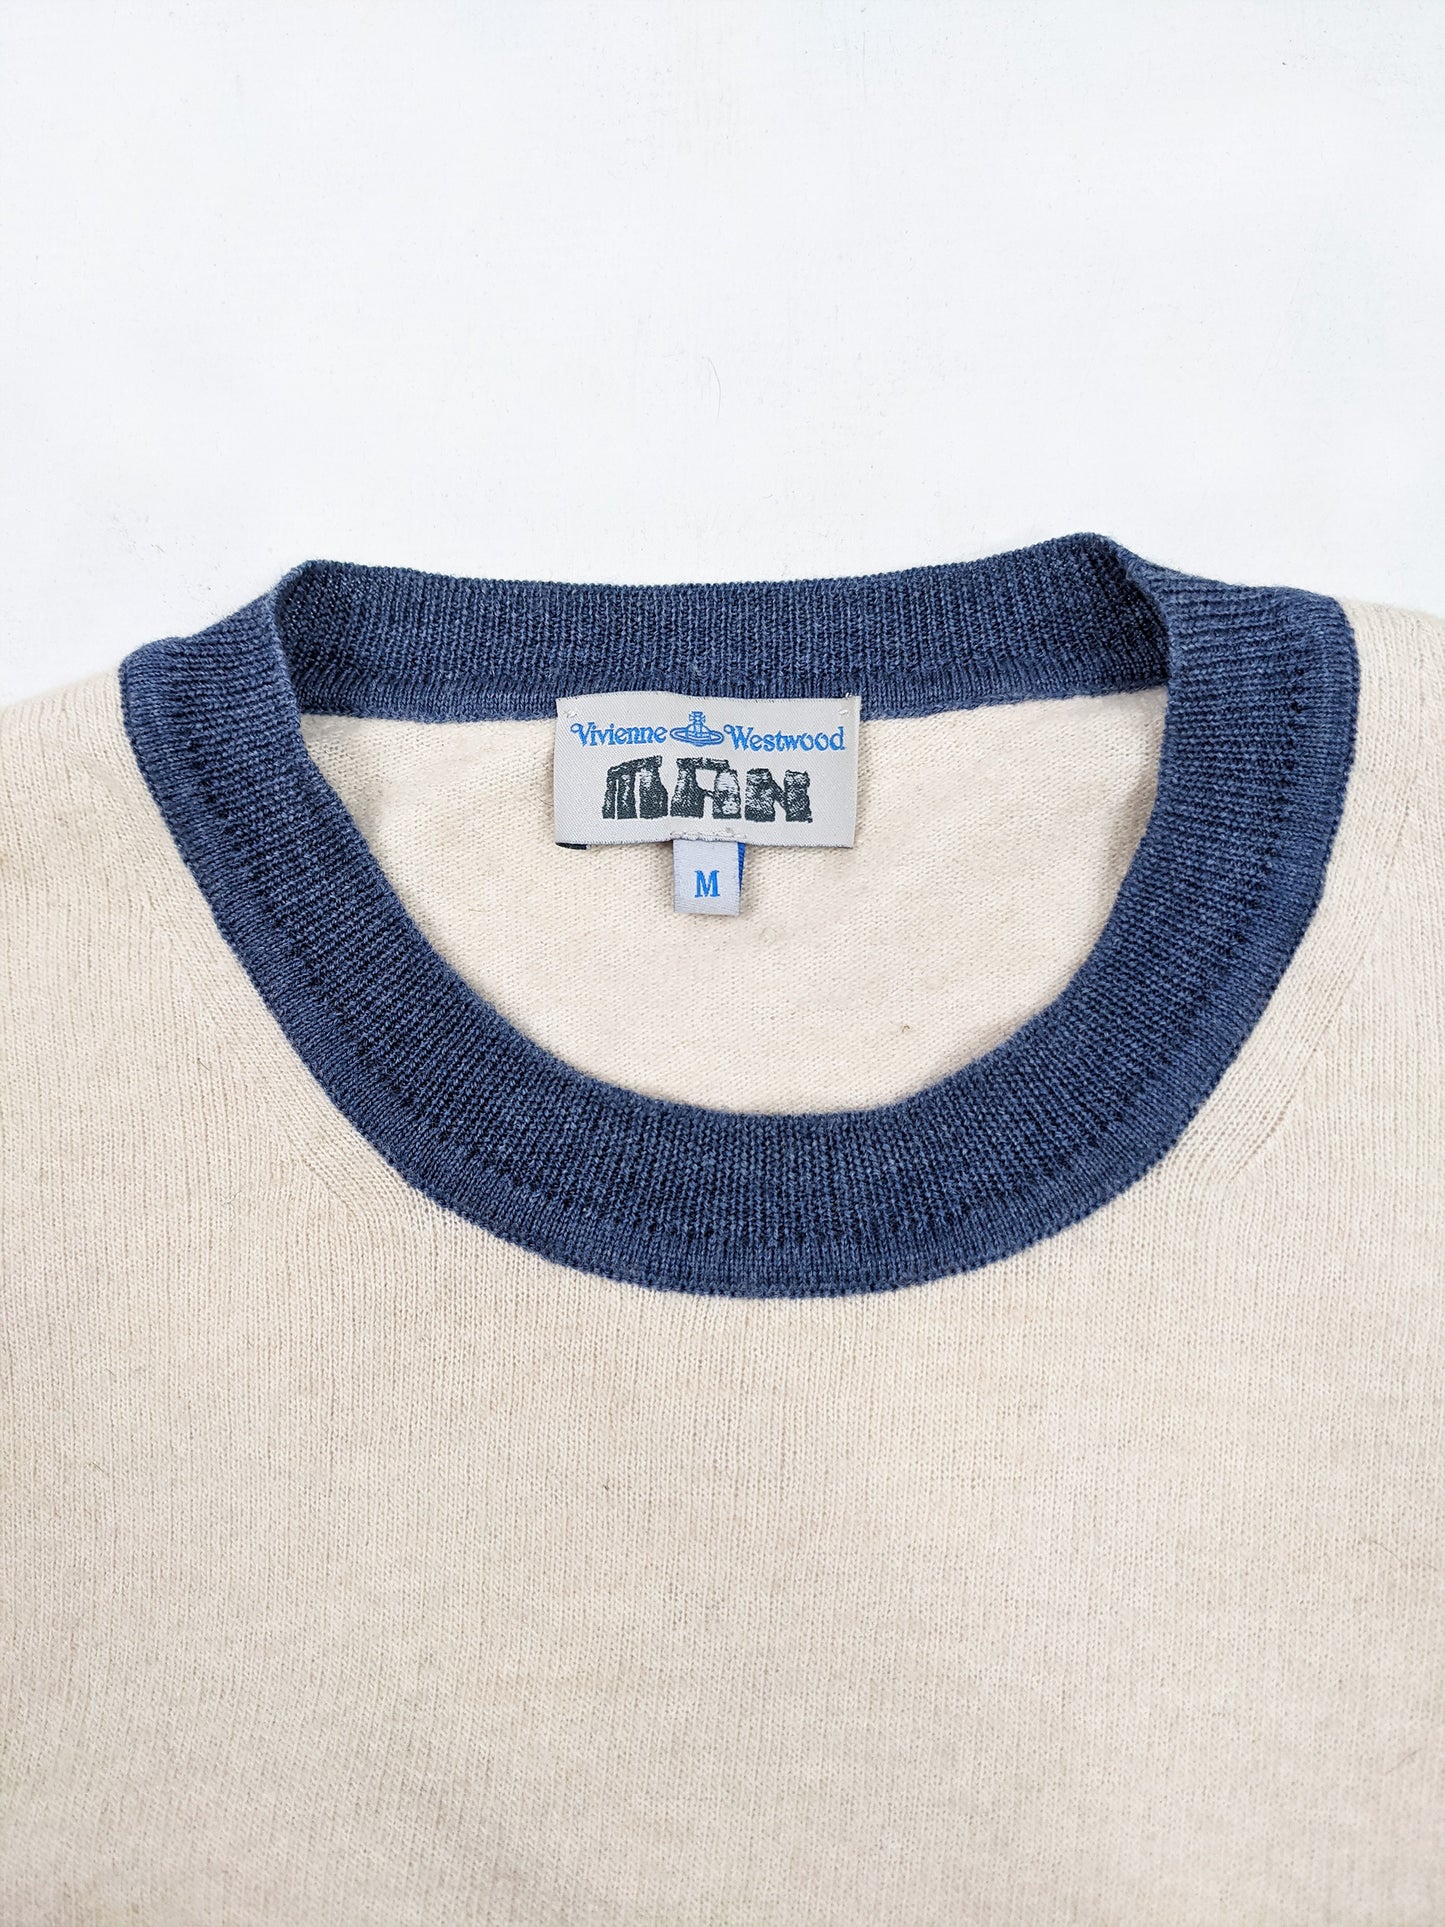 Mens Archival Prep Schoolboy Embroidered Sweater, A/W 2011